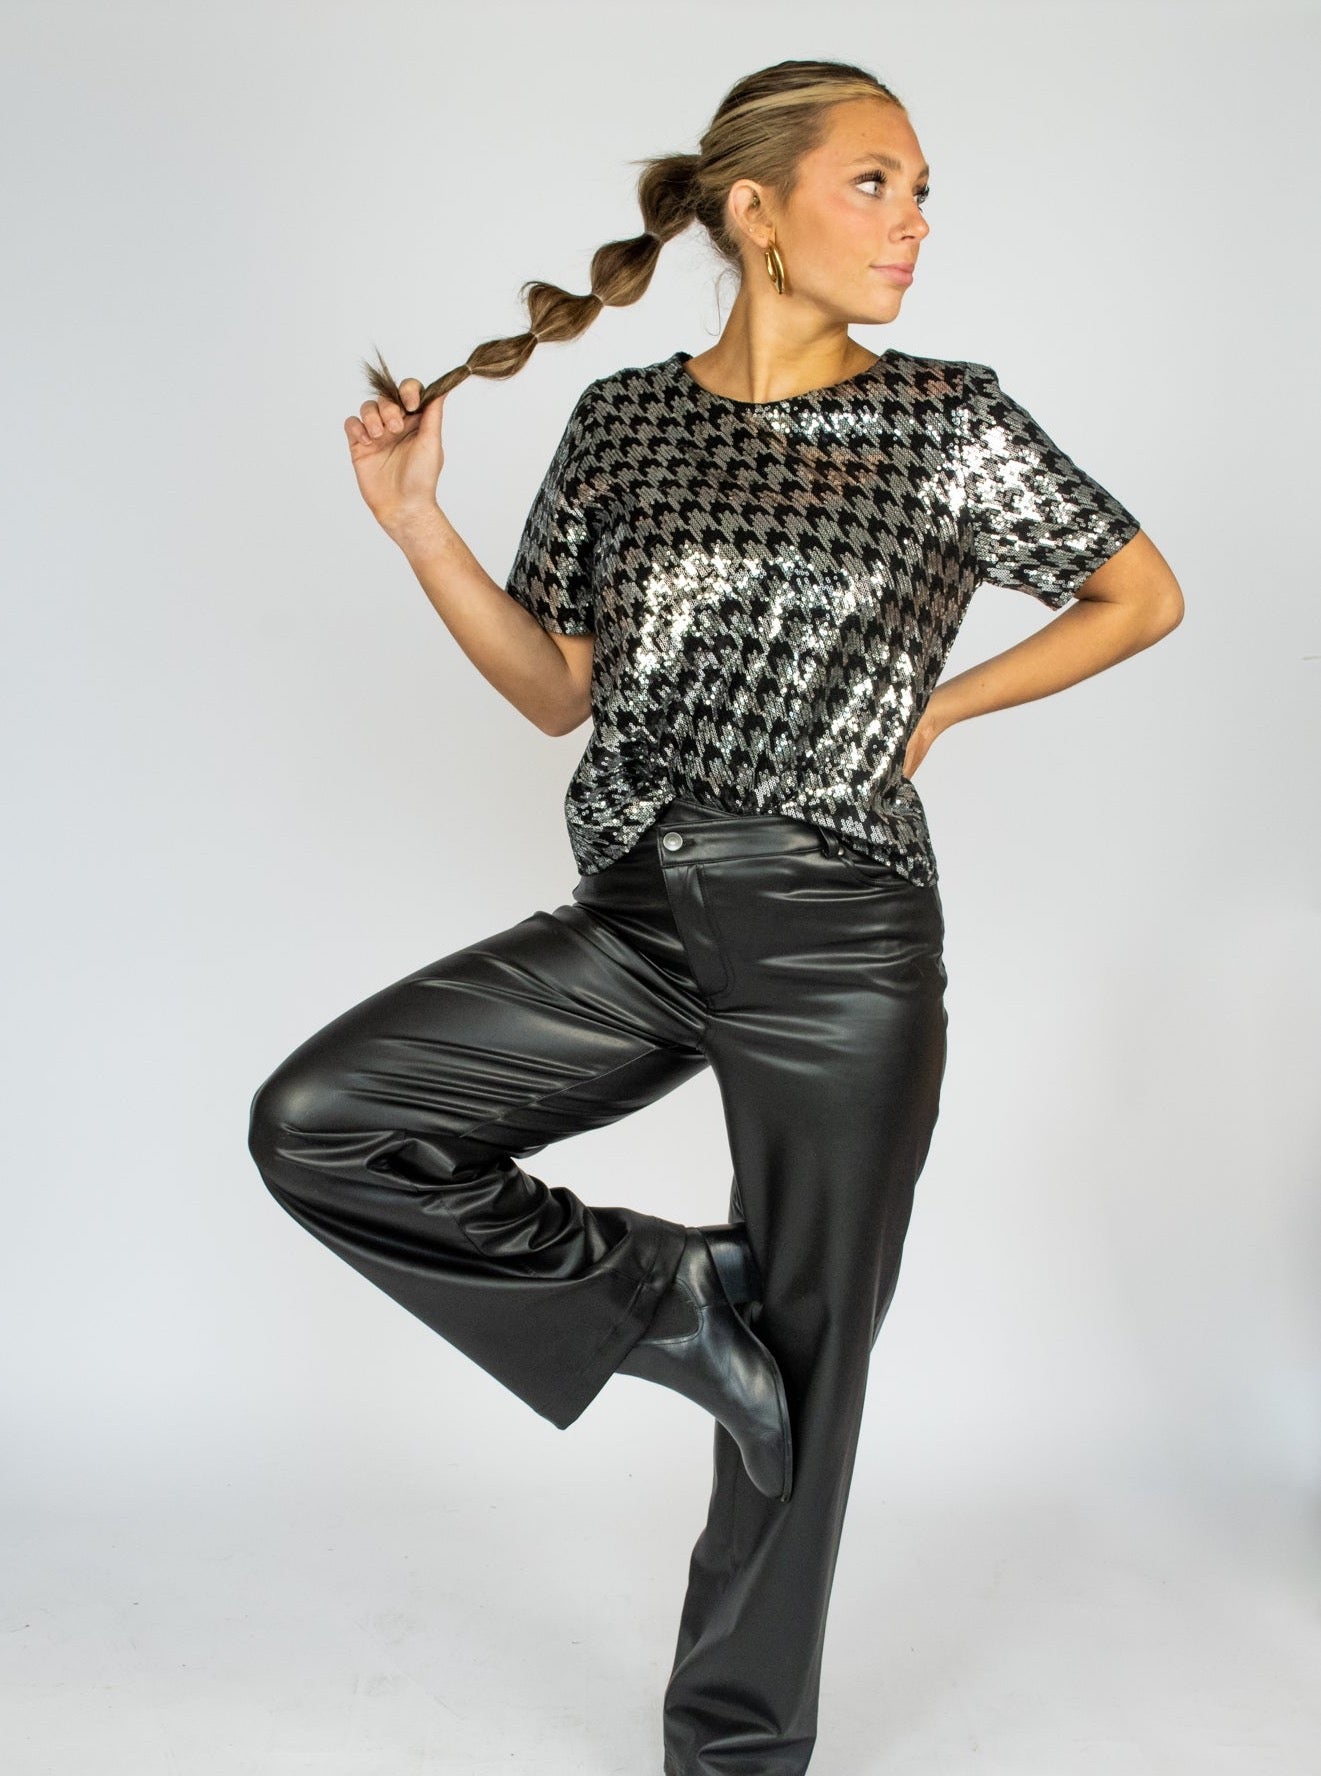 A model wearing a black and white houndstooth sequin tee with black pleather pants.